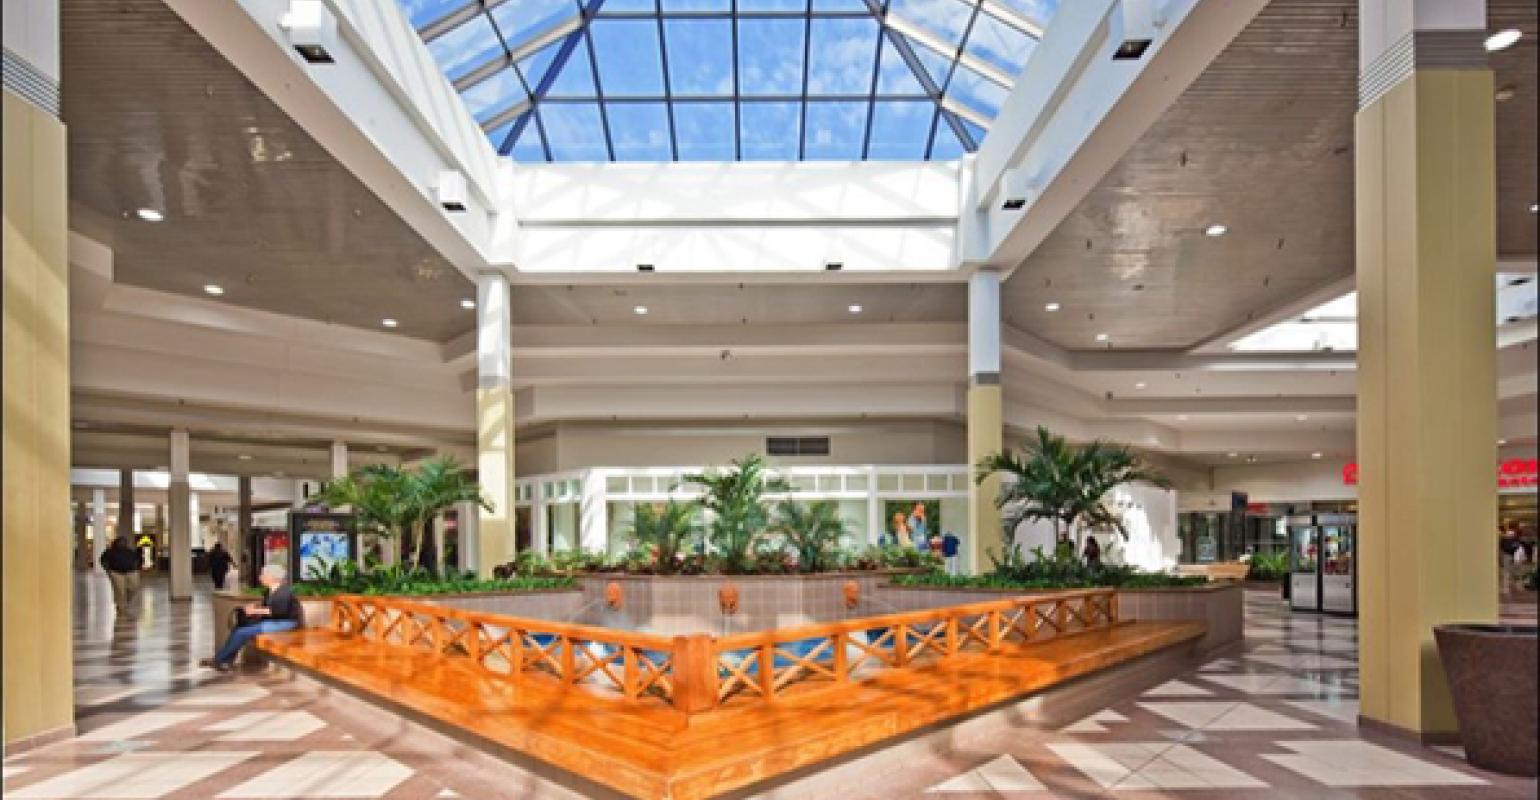 Rouse Refinances Lakeland Square Mall in 65M Deal National Real